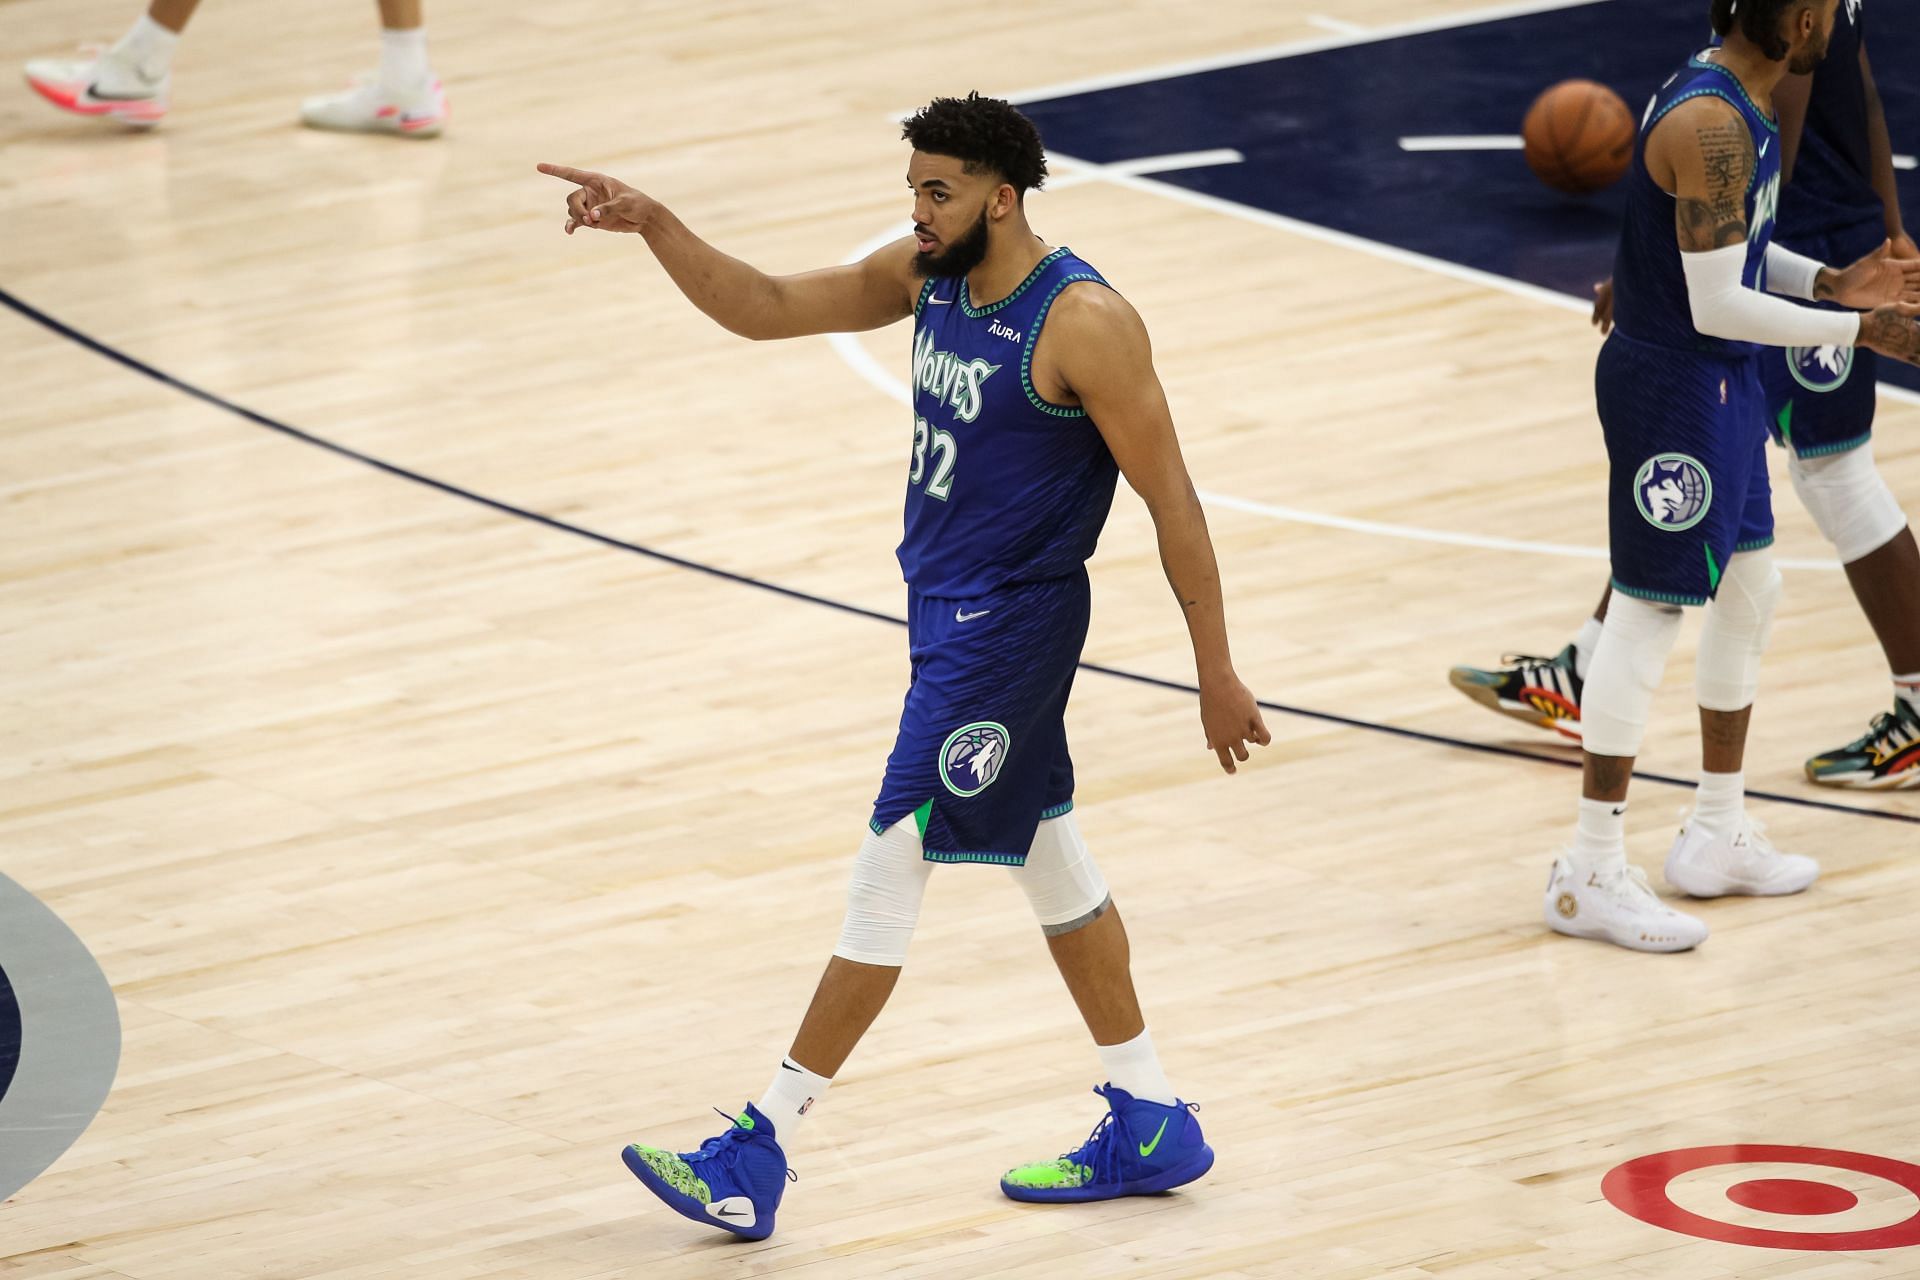 NBA League Pass subscribers will be able to watch the Timberwolves (Image via Getty Images)